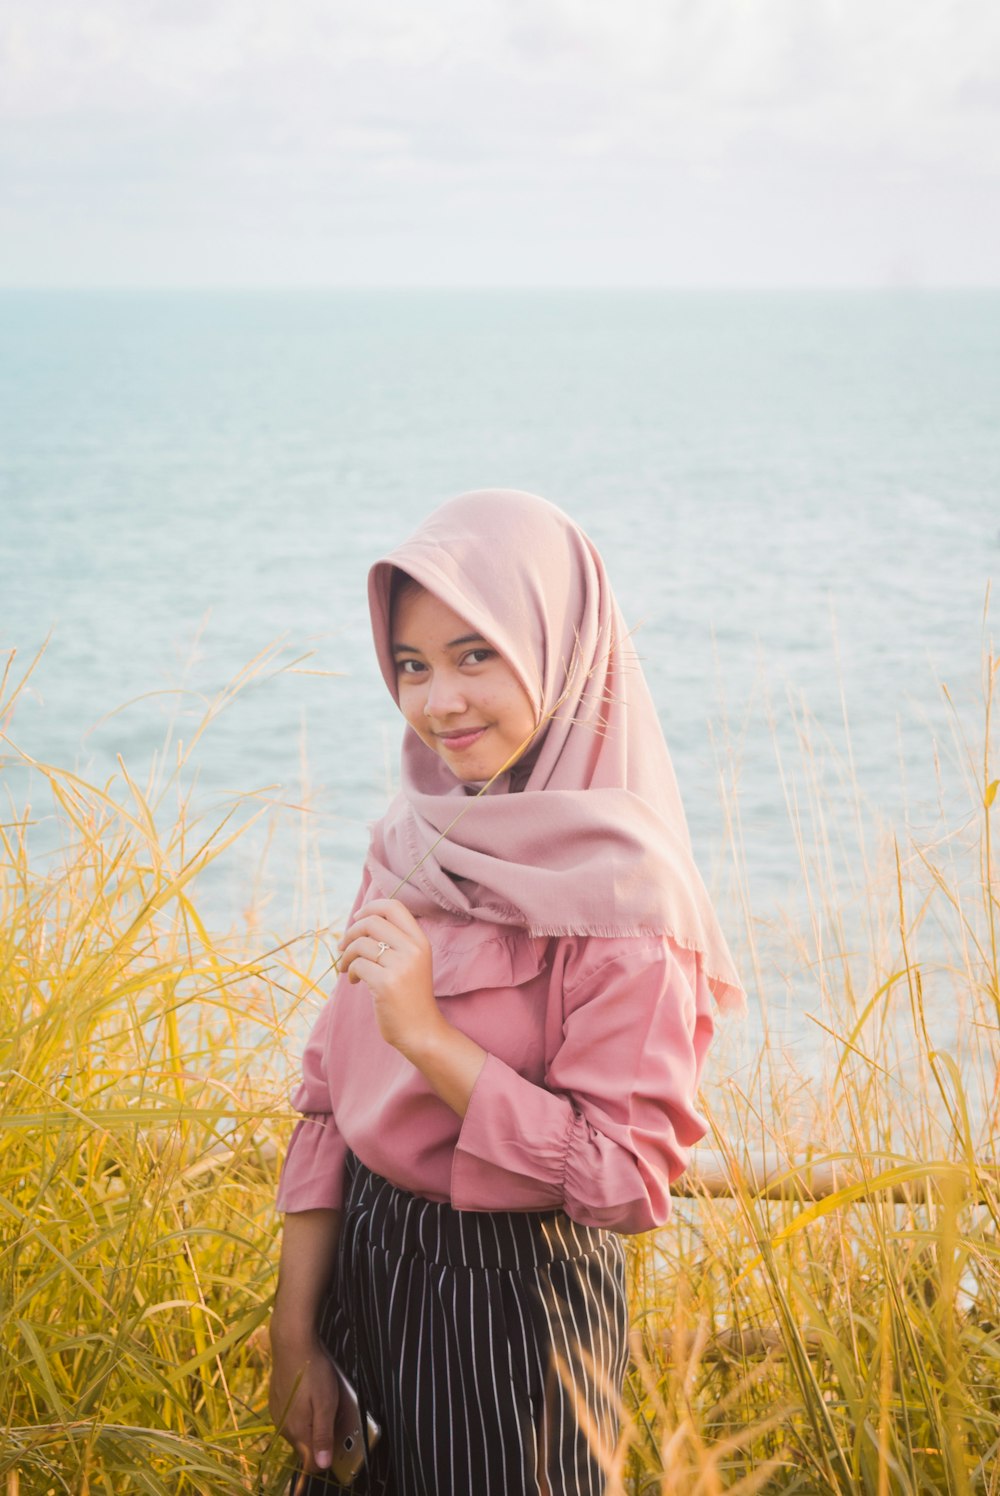 woman in pink hijab standing on green grass field near body of water during daytime